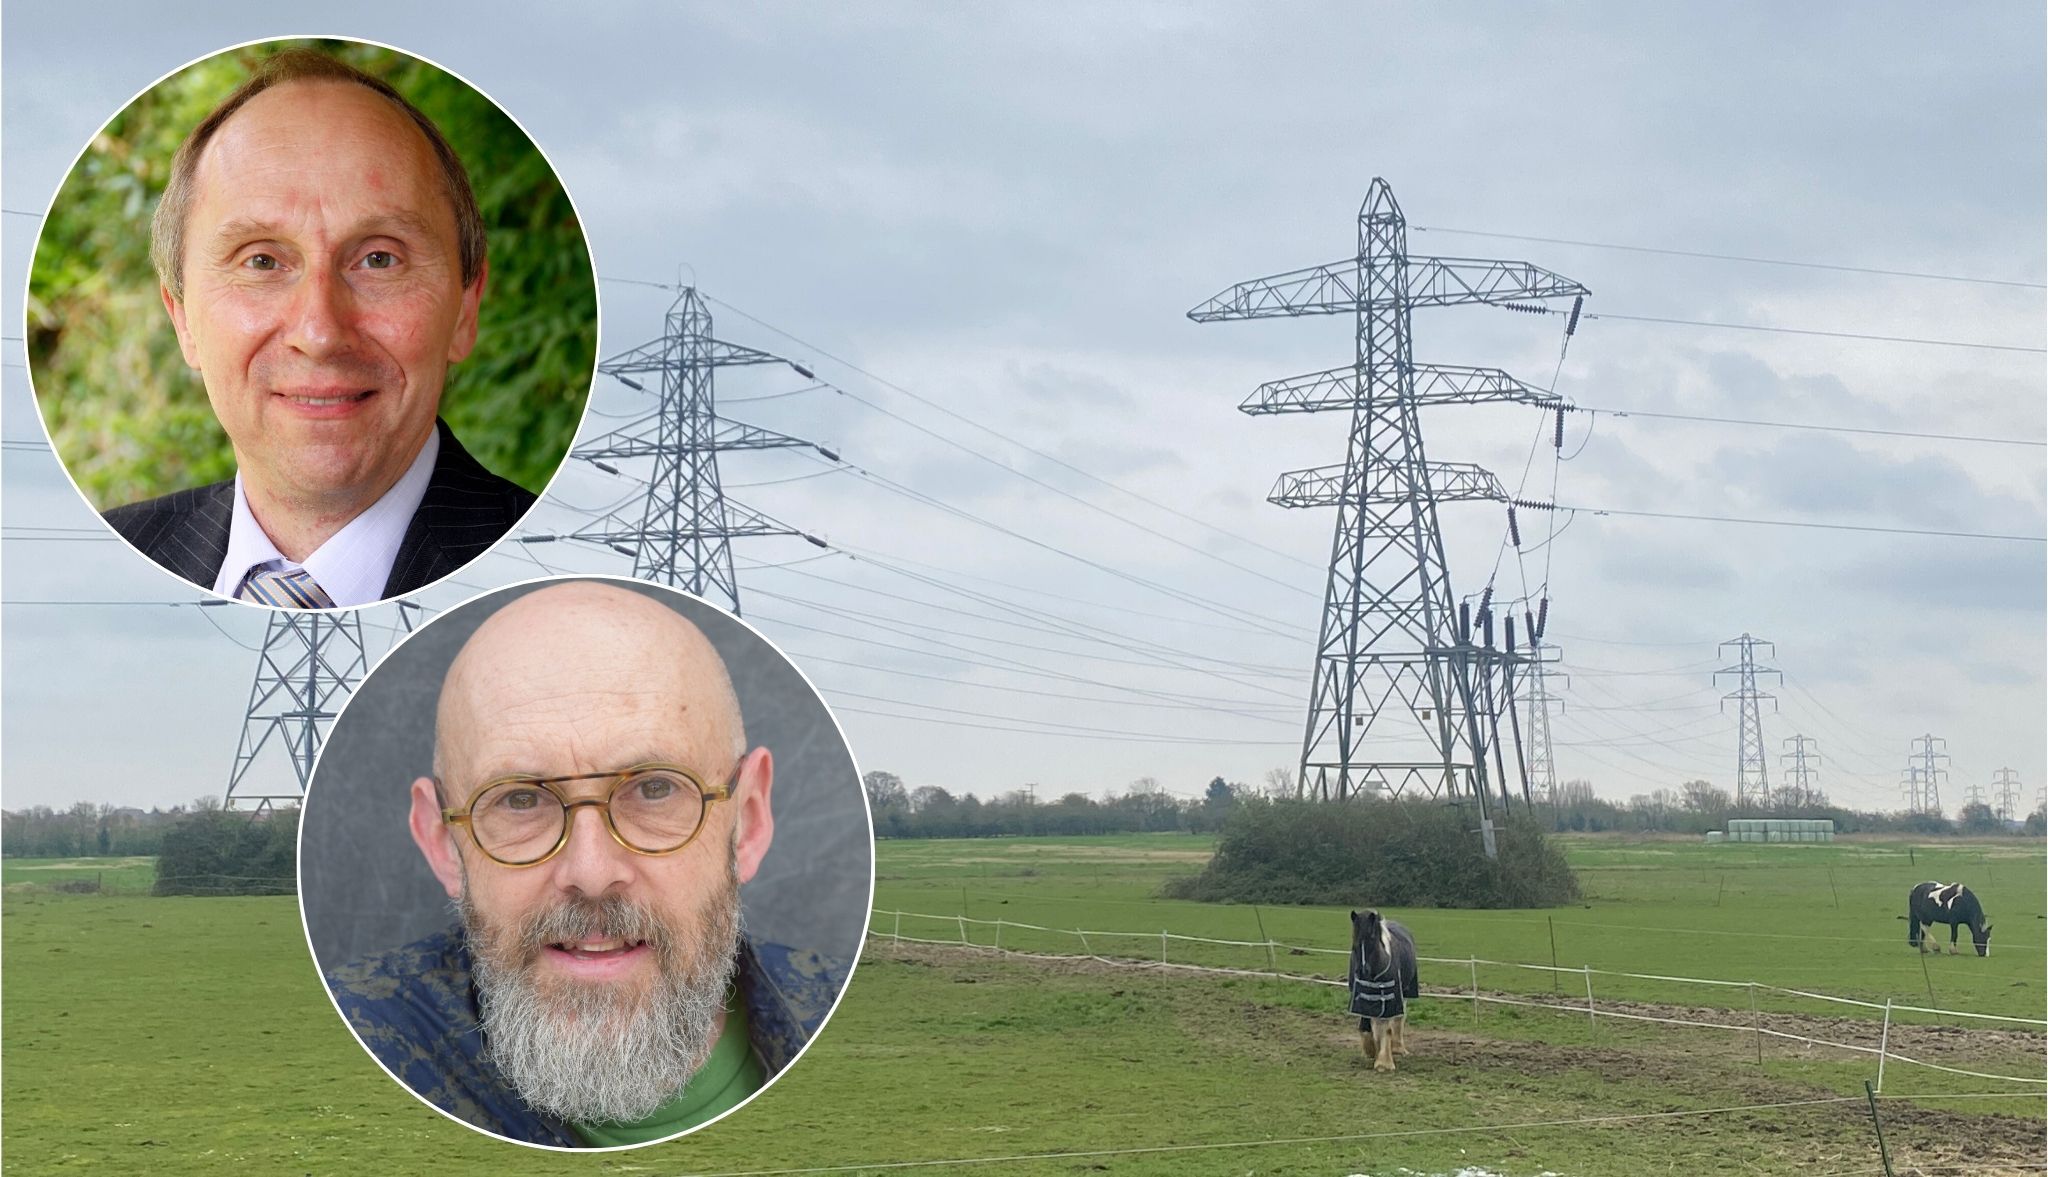 Cllr John Ward and Cllr Andrew Stringer and field with pylons